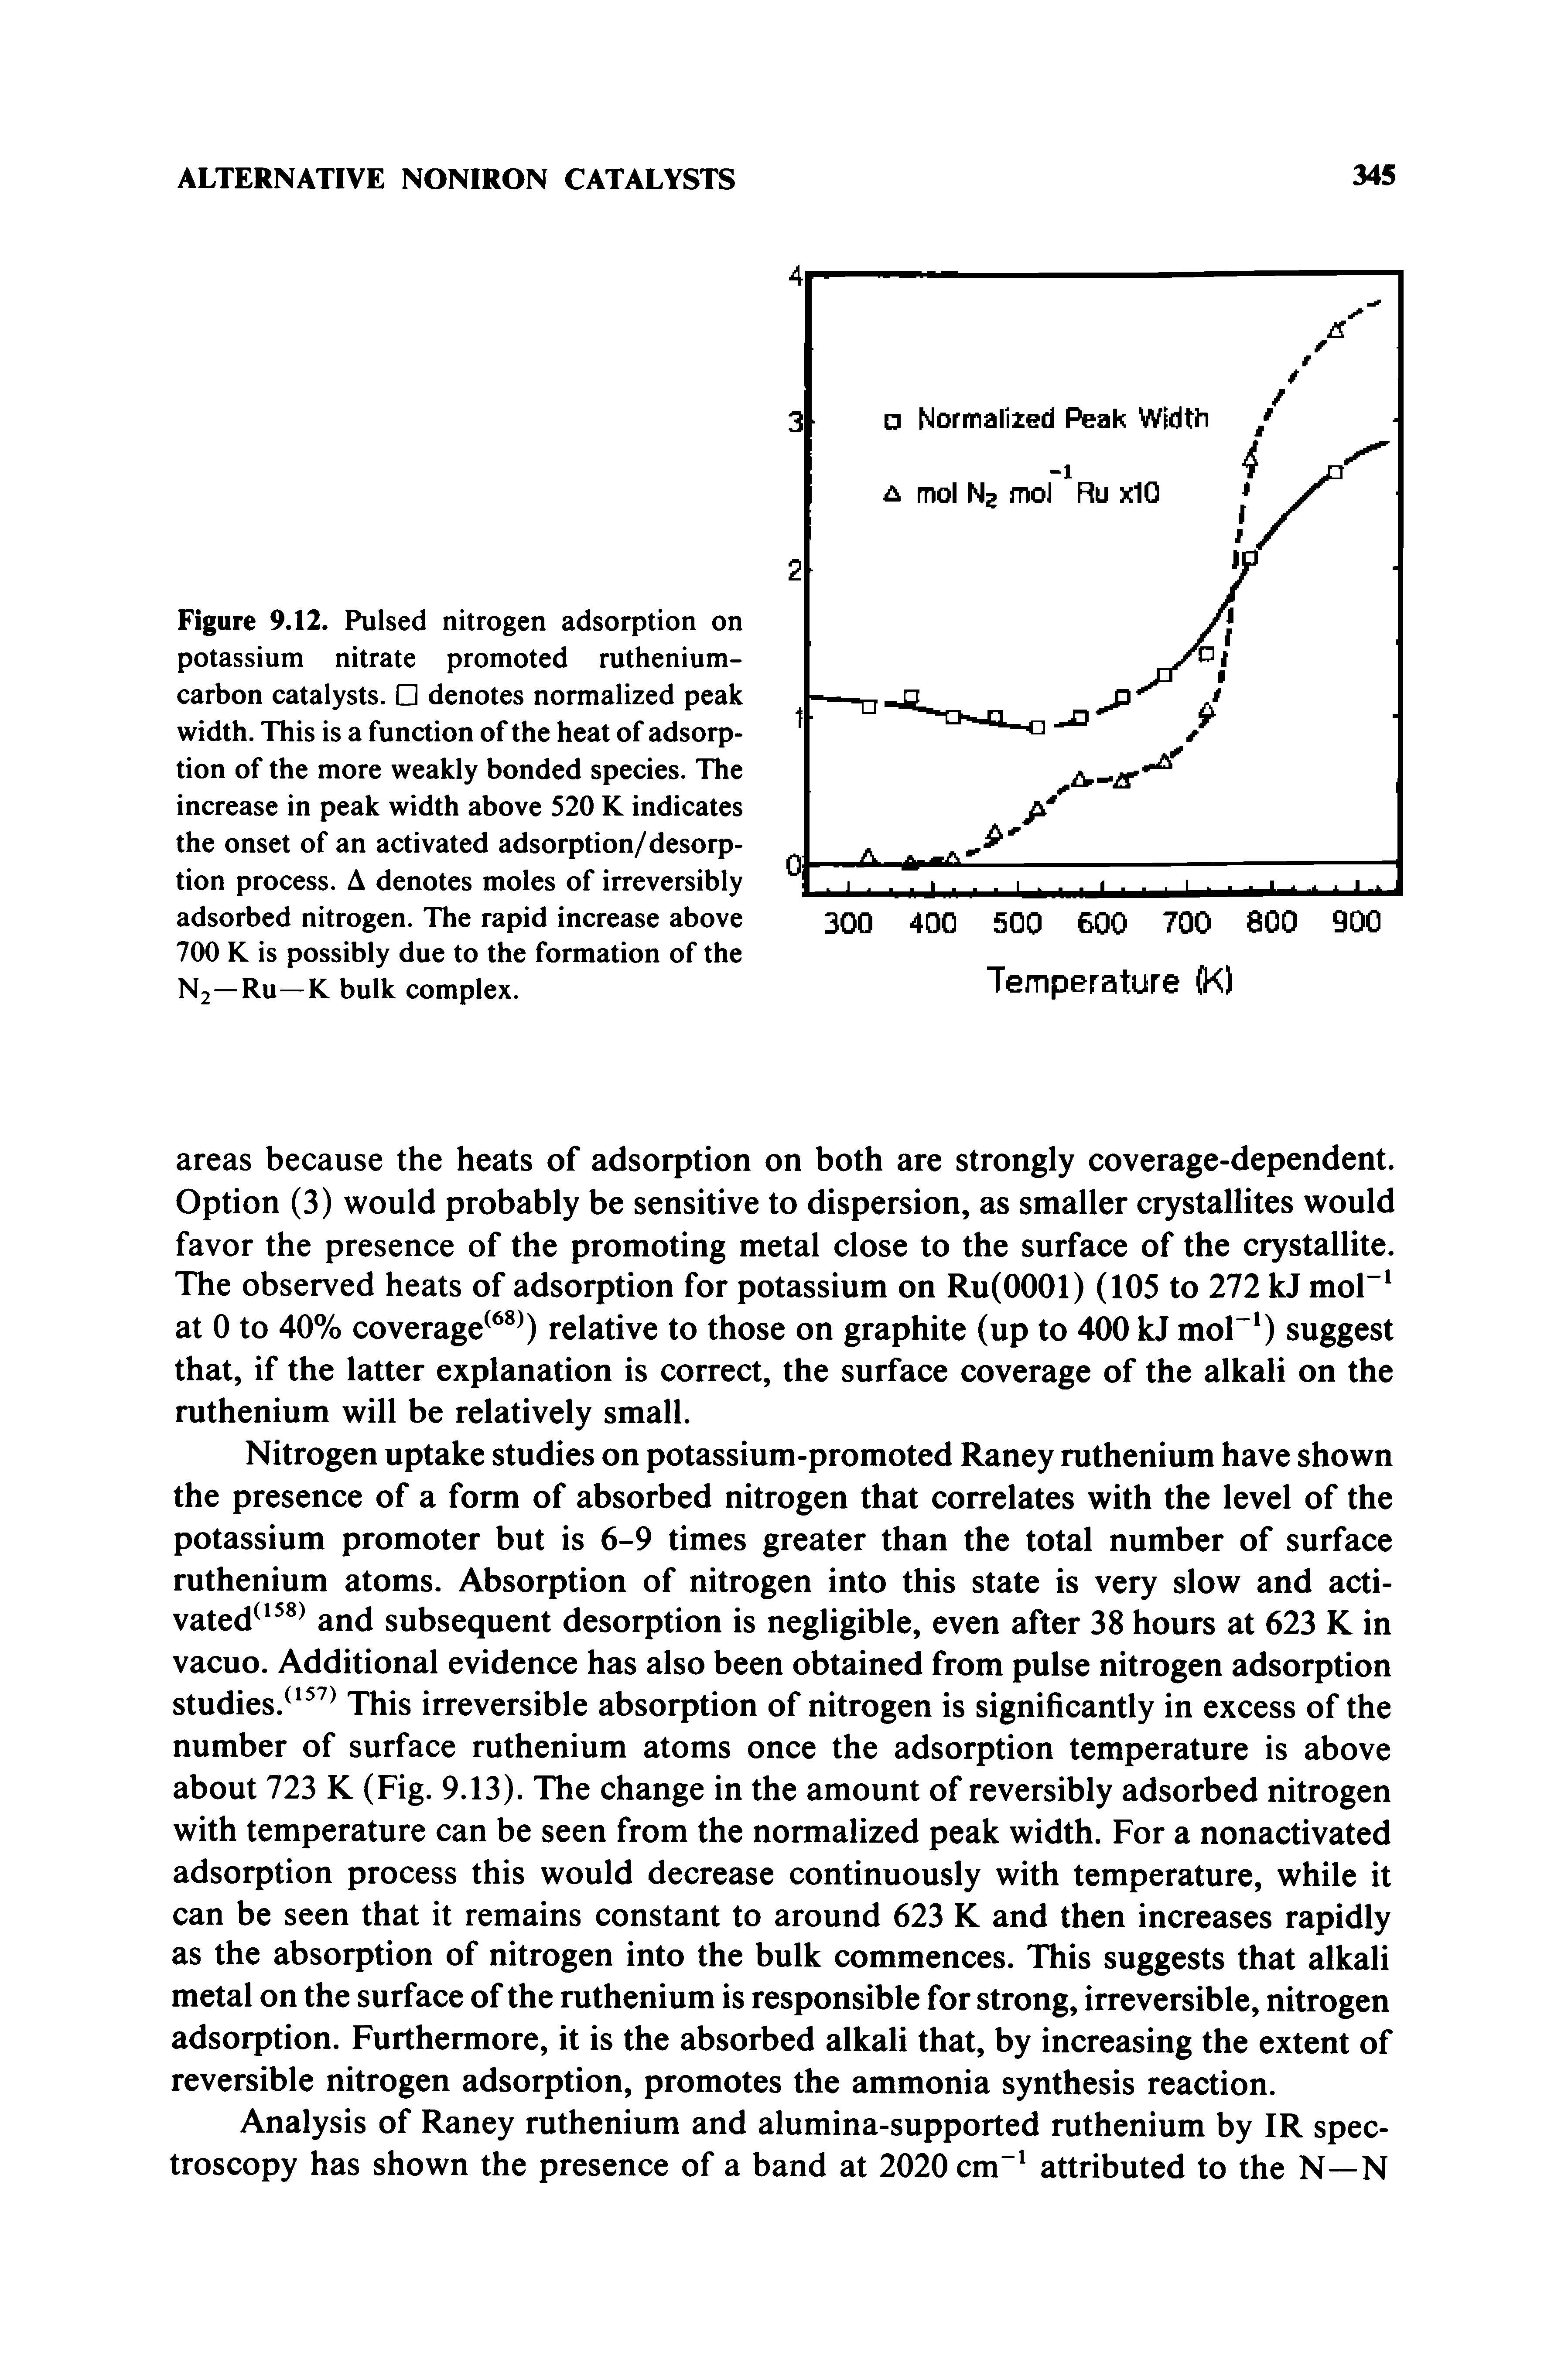 Figure 9.12. Pulsed nitrogen adsorption on potassium nitrate promoted ruthenium-carbon catalysts. denotes normalized peak width. This is a function of the heat of adsorp> tion of the more weakly bonded species. The increase in peak width above 520 K indicates the onset of an activated adsorption/desorption process. A denotes moles of irreversibly adsorbed nitrogen. The rapid increase above 700 K is possibly due to the formation of the N2—Ru—K bulk complex.